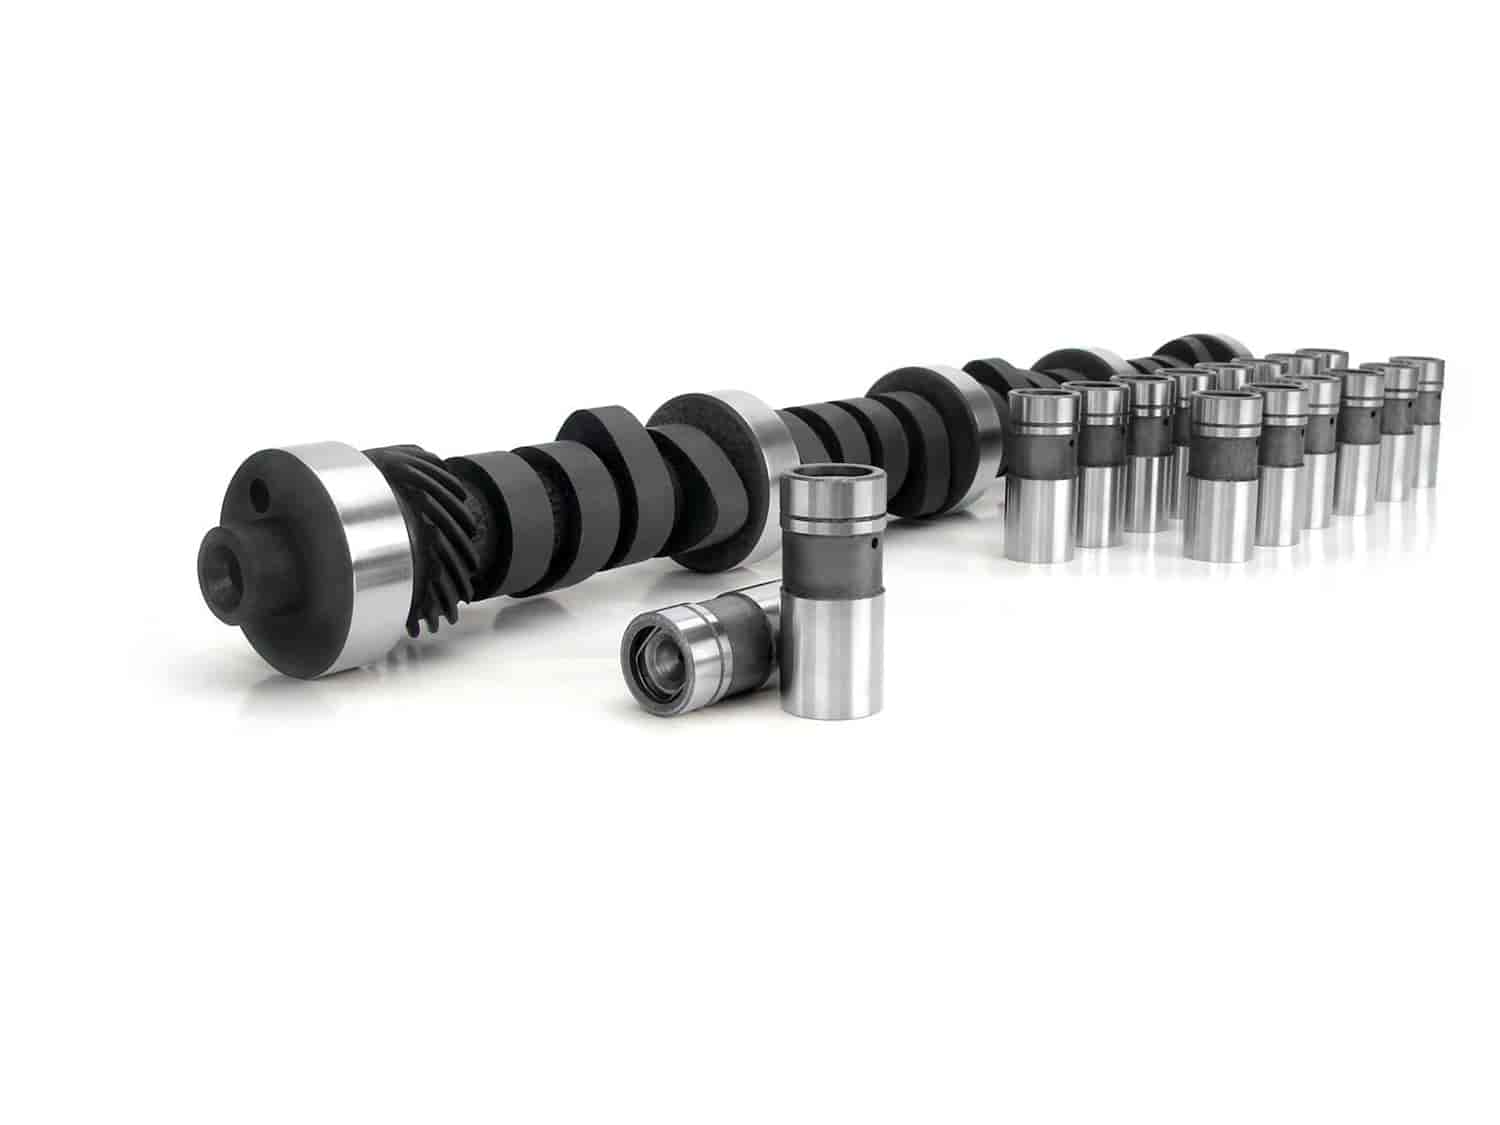 Voodoo Solid Flat Tappet Camshaft Complete Kit Ford 351W & 302 H.O. Lift: .554" /.576"